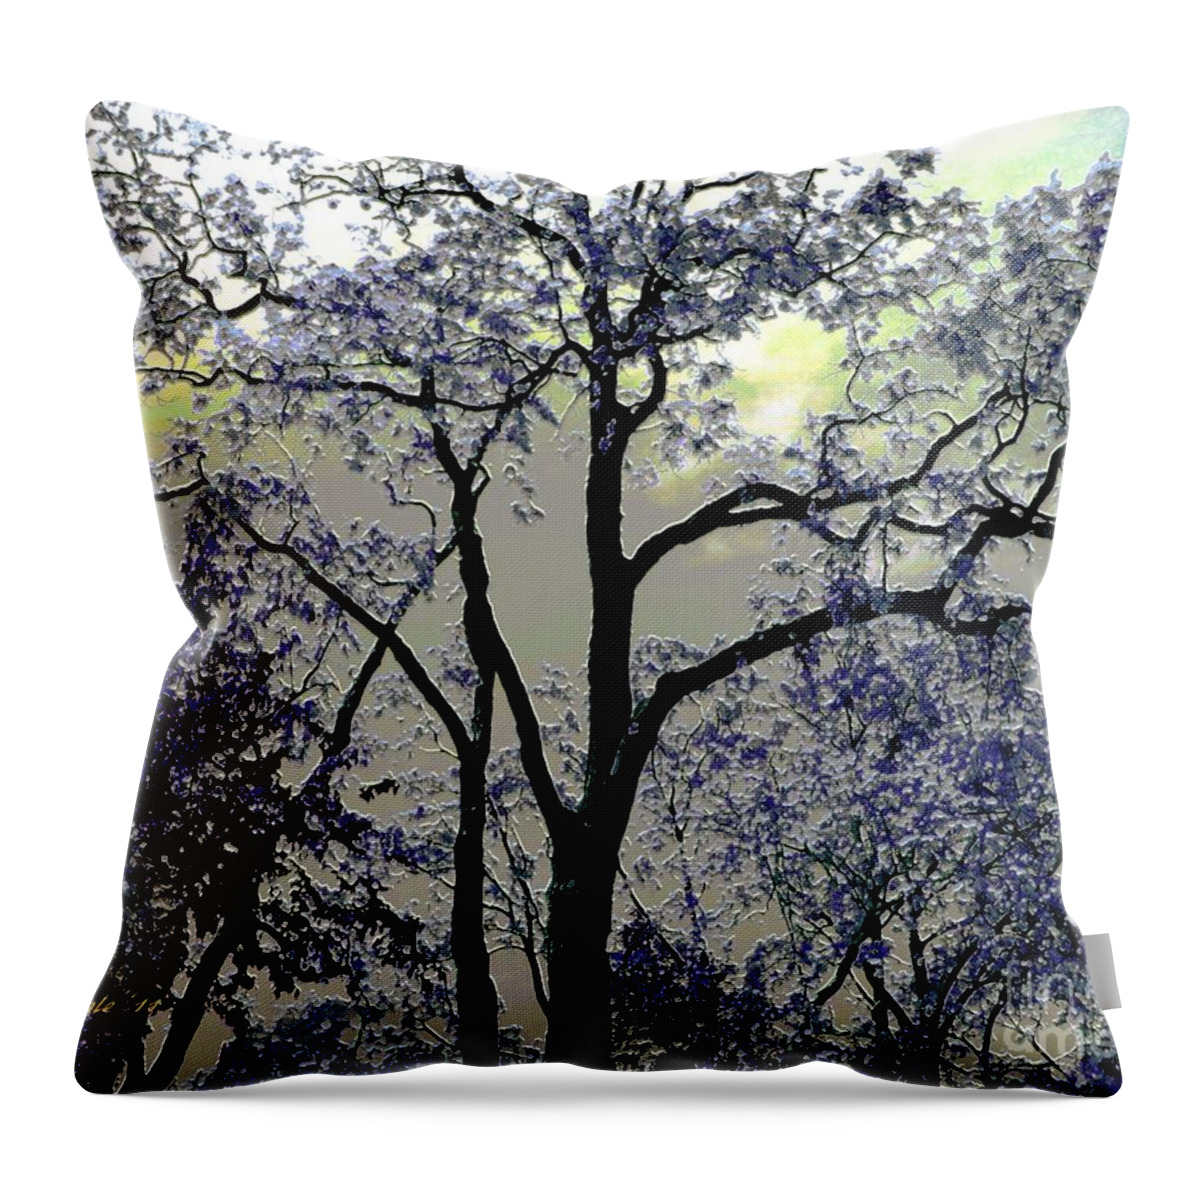  Trees Throw Pillow featuring the digital art Magical Garden by Dale  Ford